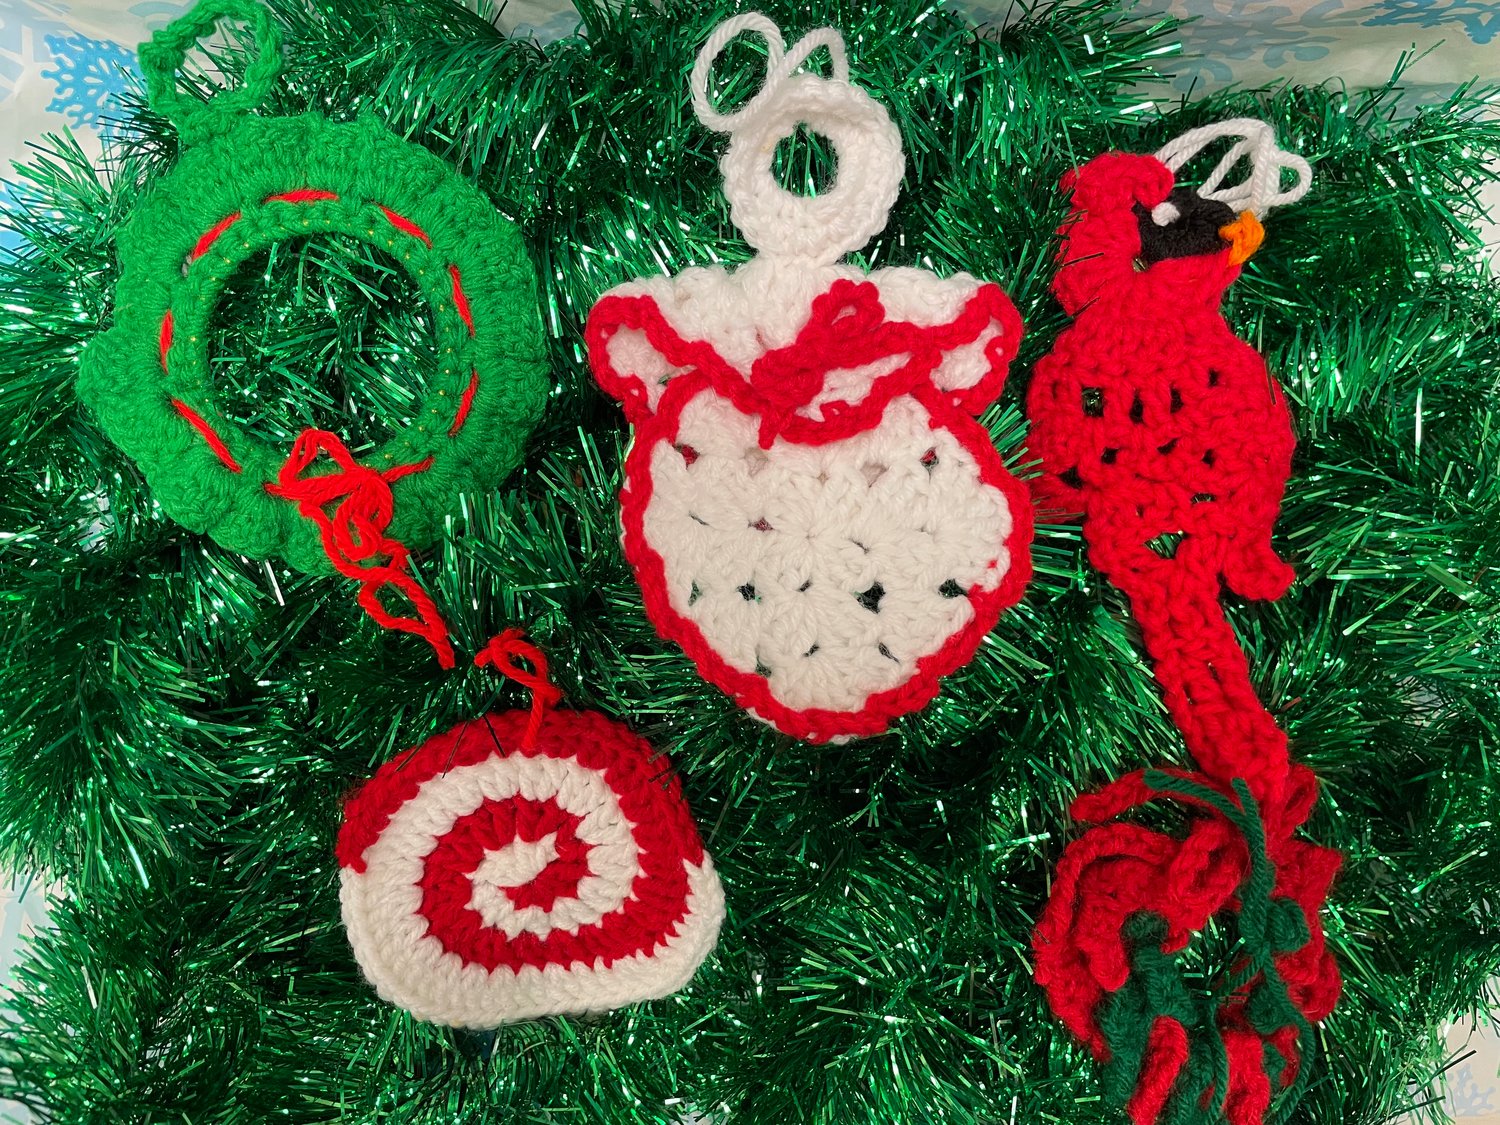 Ornaments made by older adults from Bucks County Senior Centers.